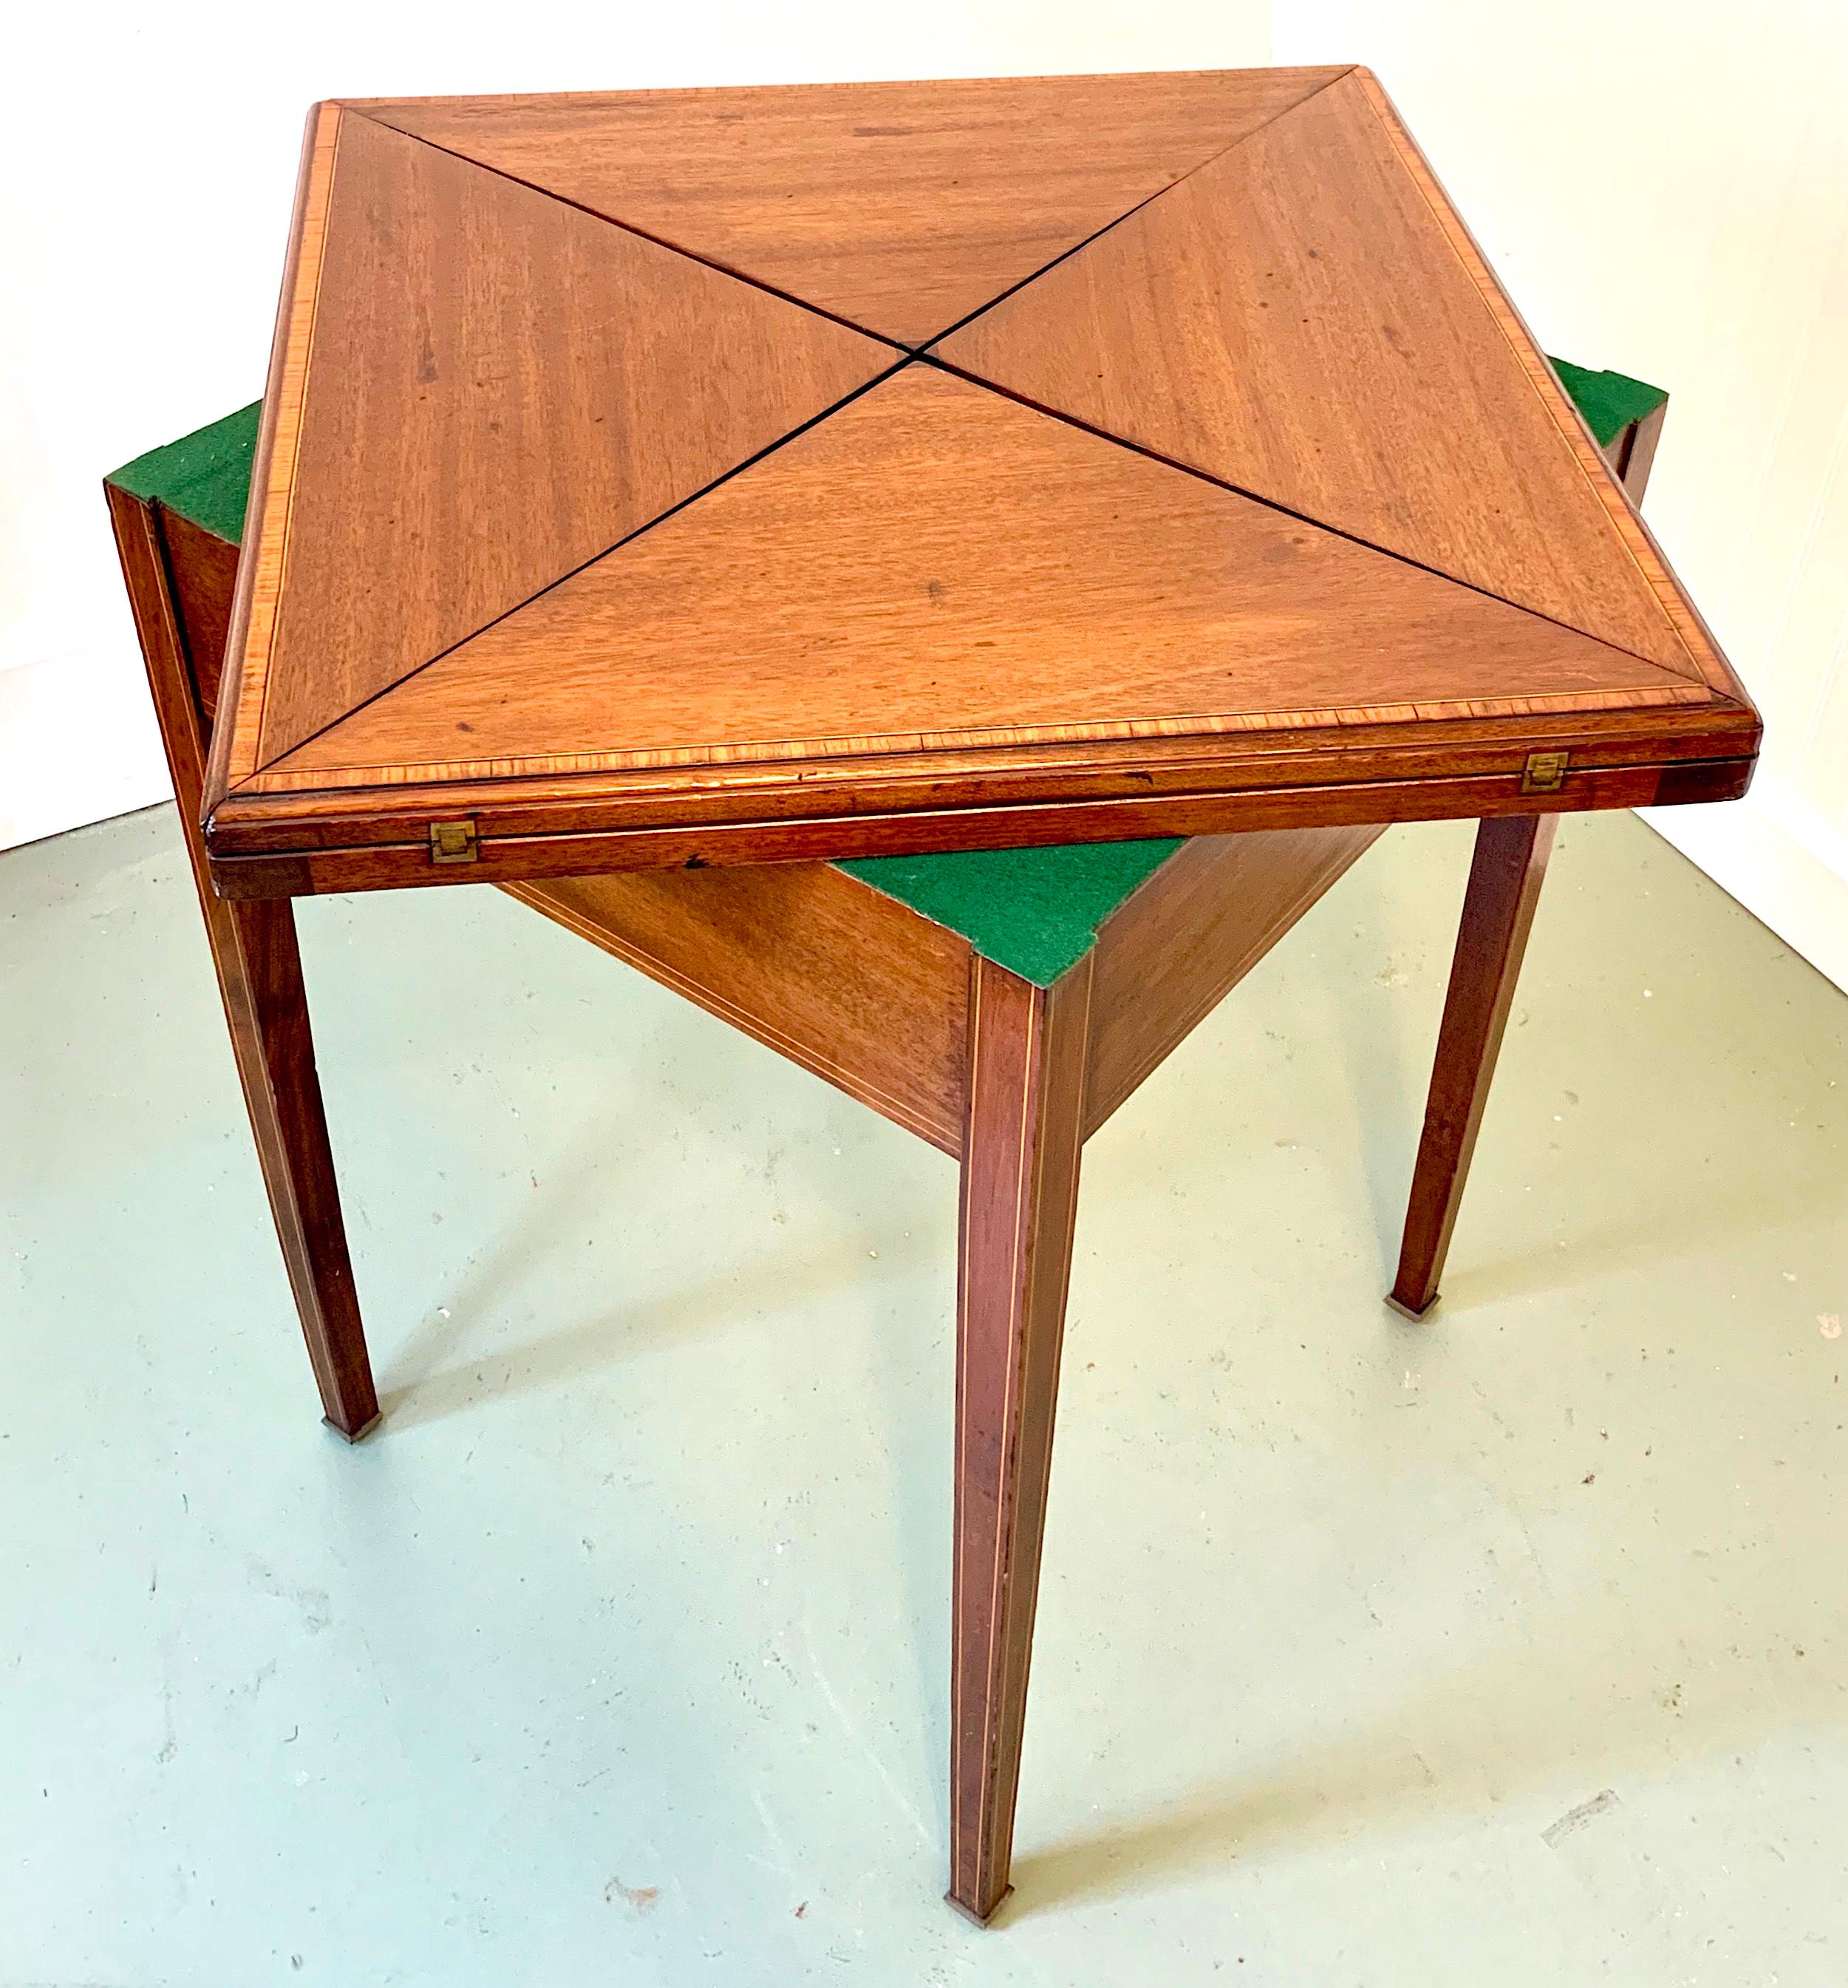 English 19th Century Unique Wooden Card Table with Envelope Top For Sale